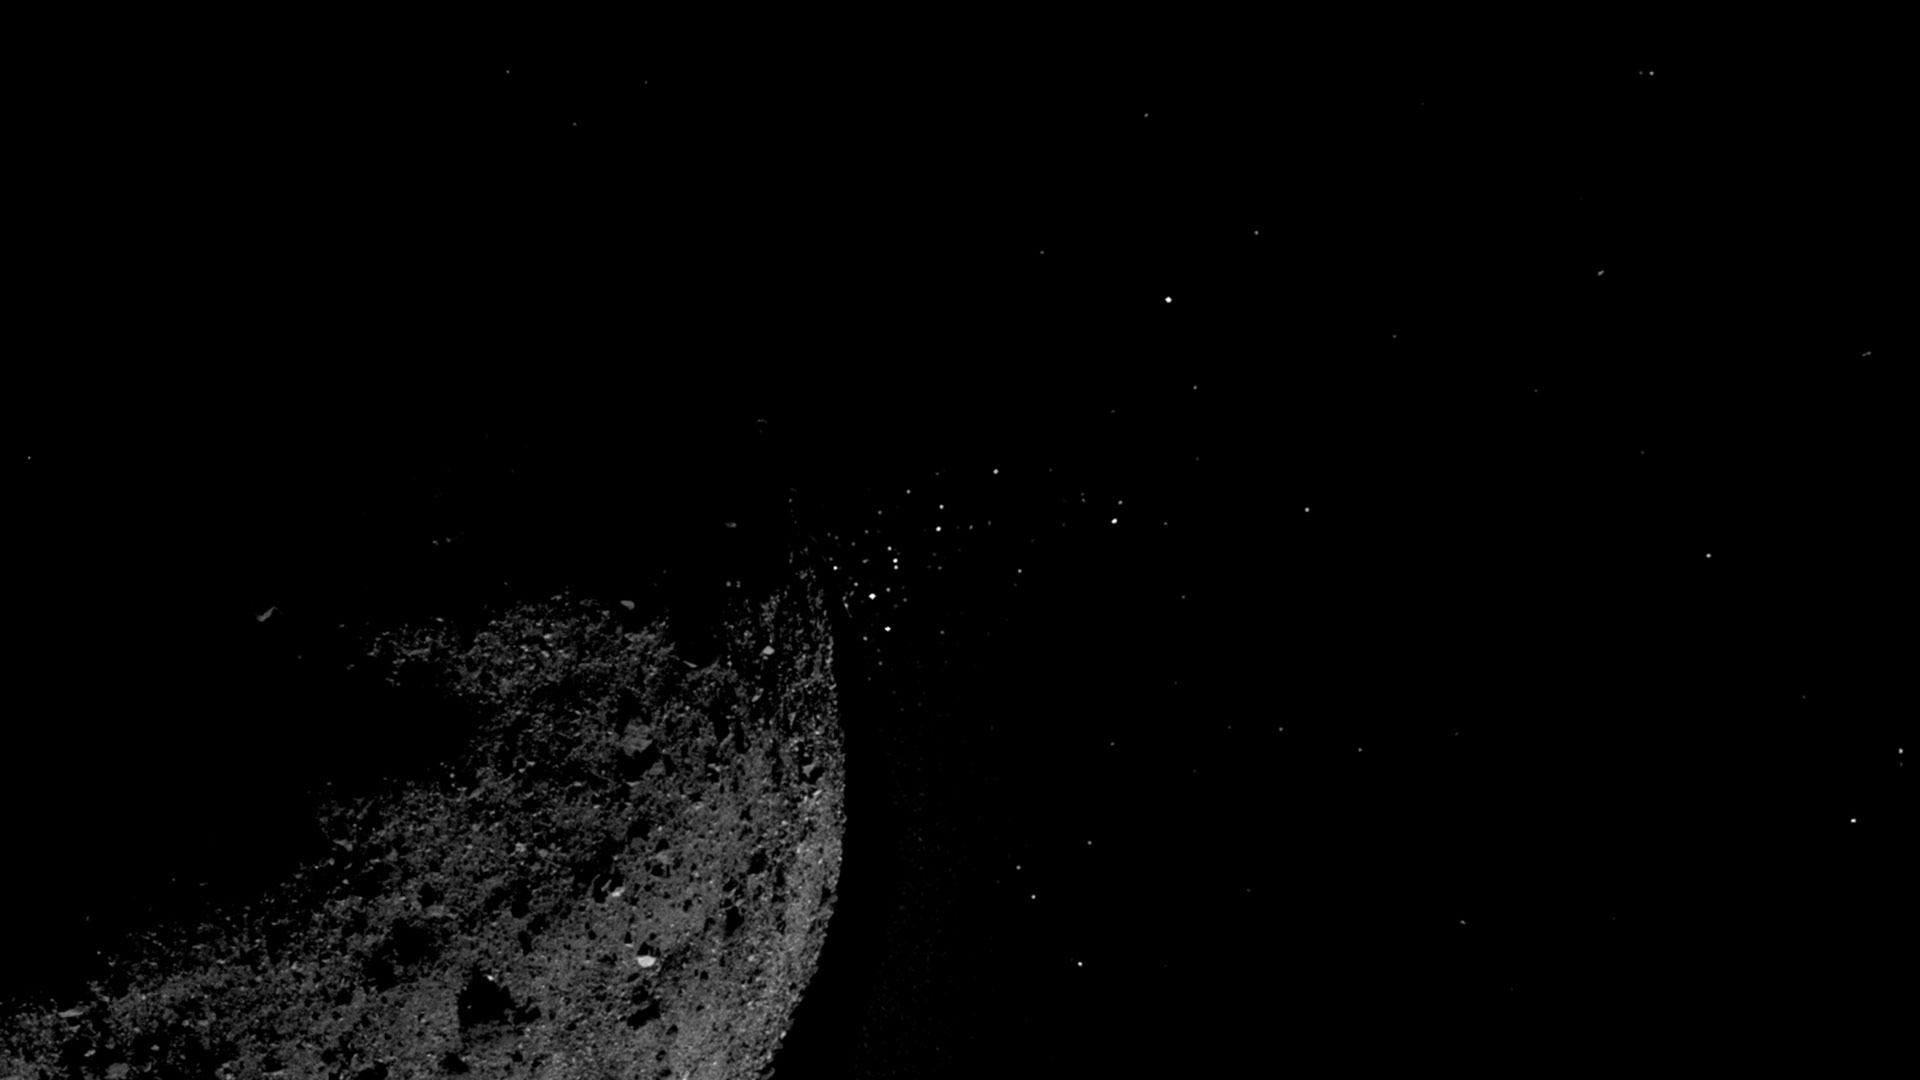 OSIRIS-REx photograph shows material being ejected from the surface of the asteroid Bennu in January 2019.